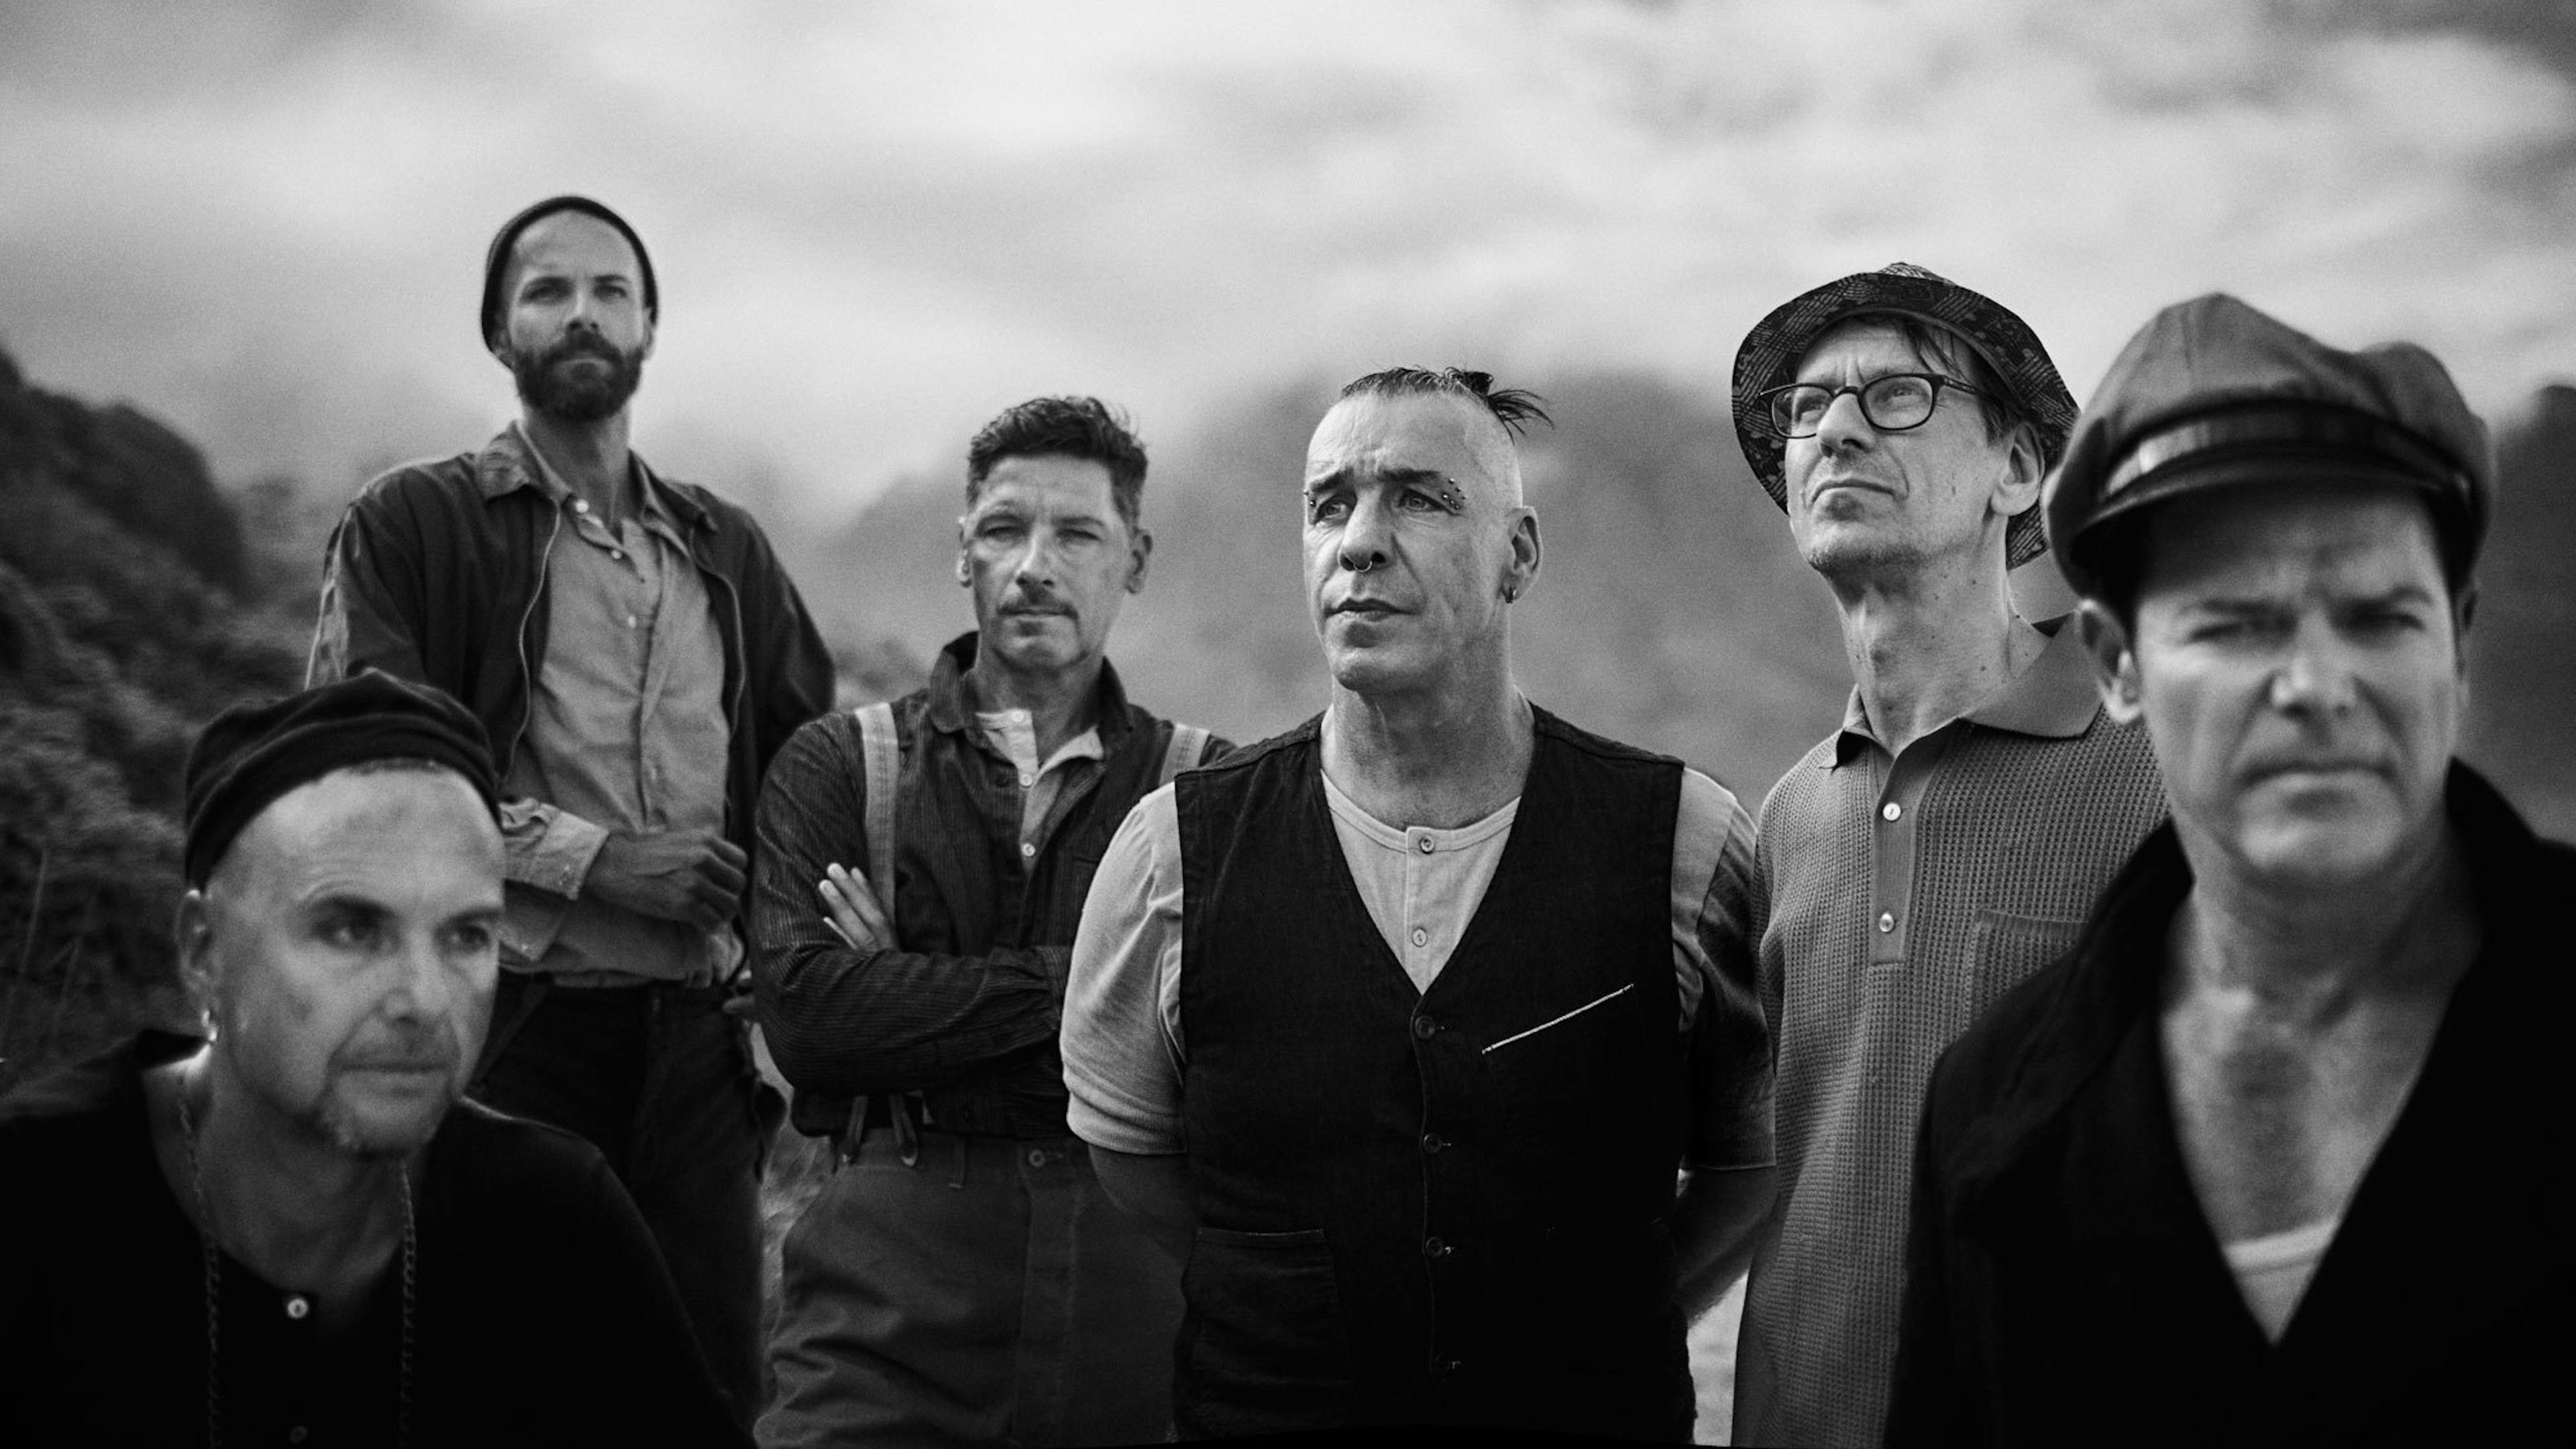 Rammstein To Re-Release Their Live In Berlin DVD With Previously Censored Footage